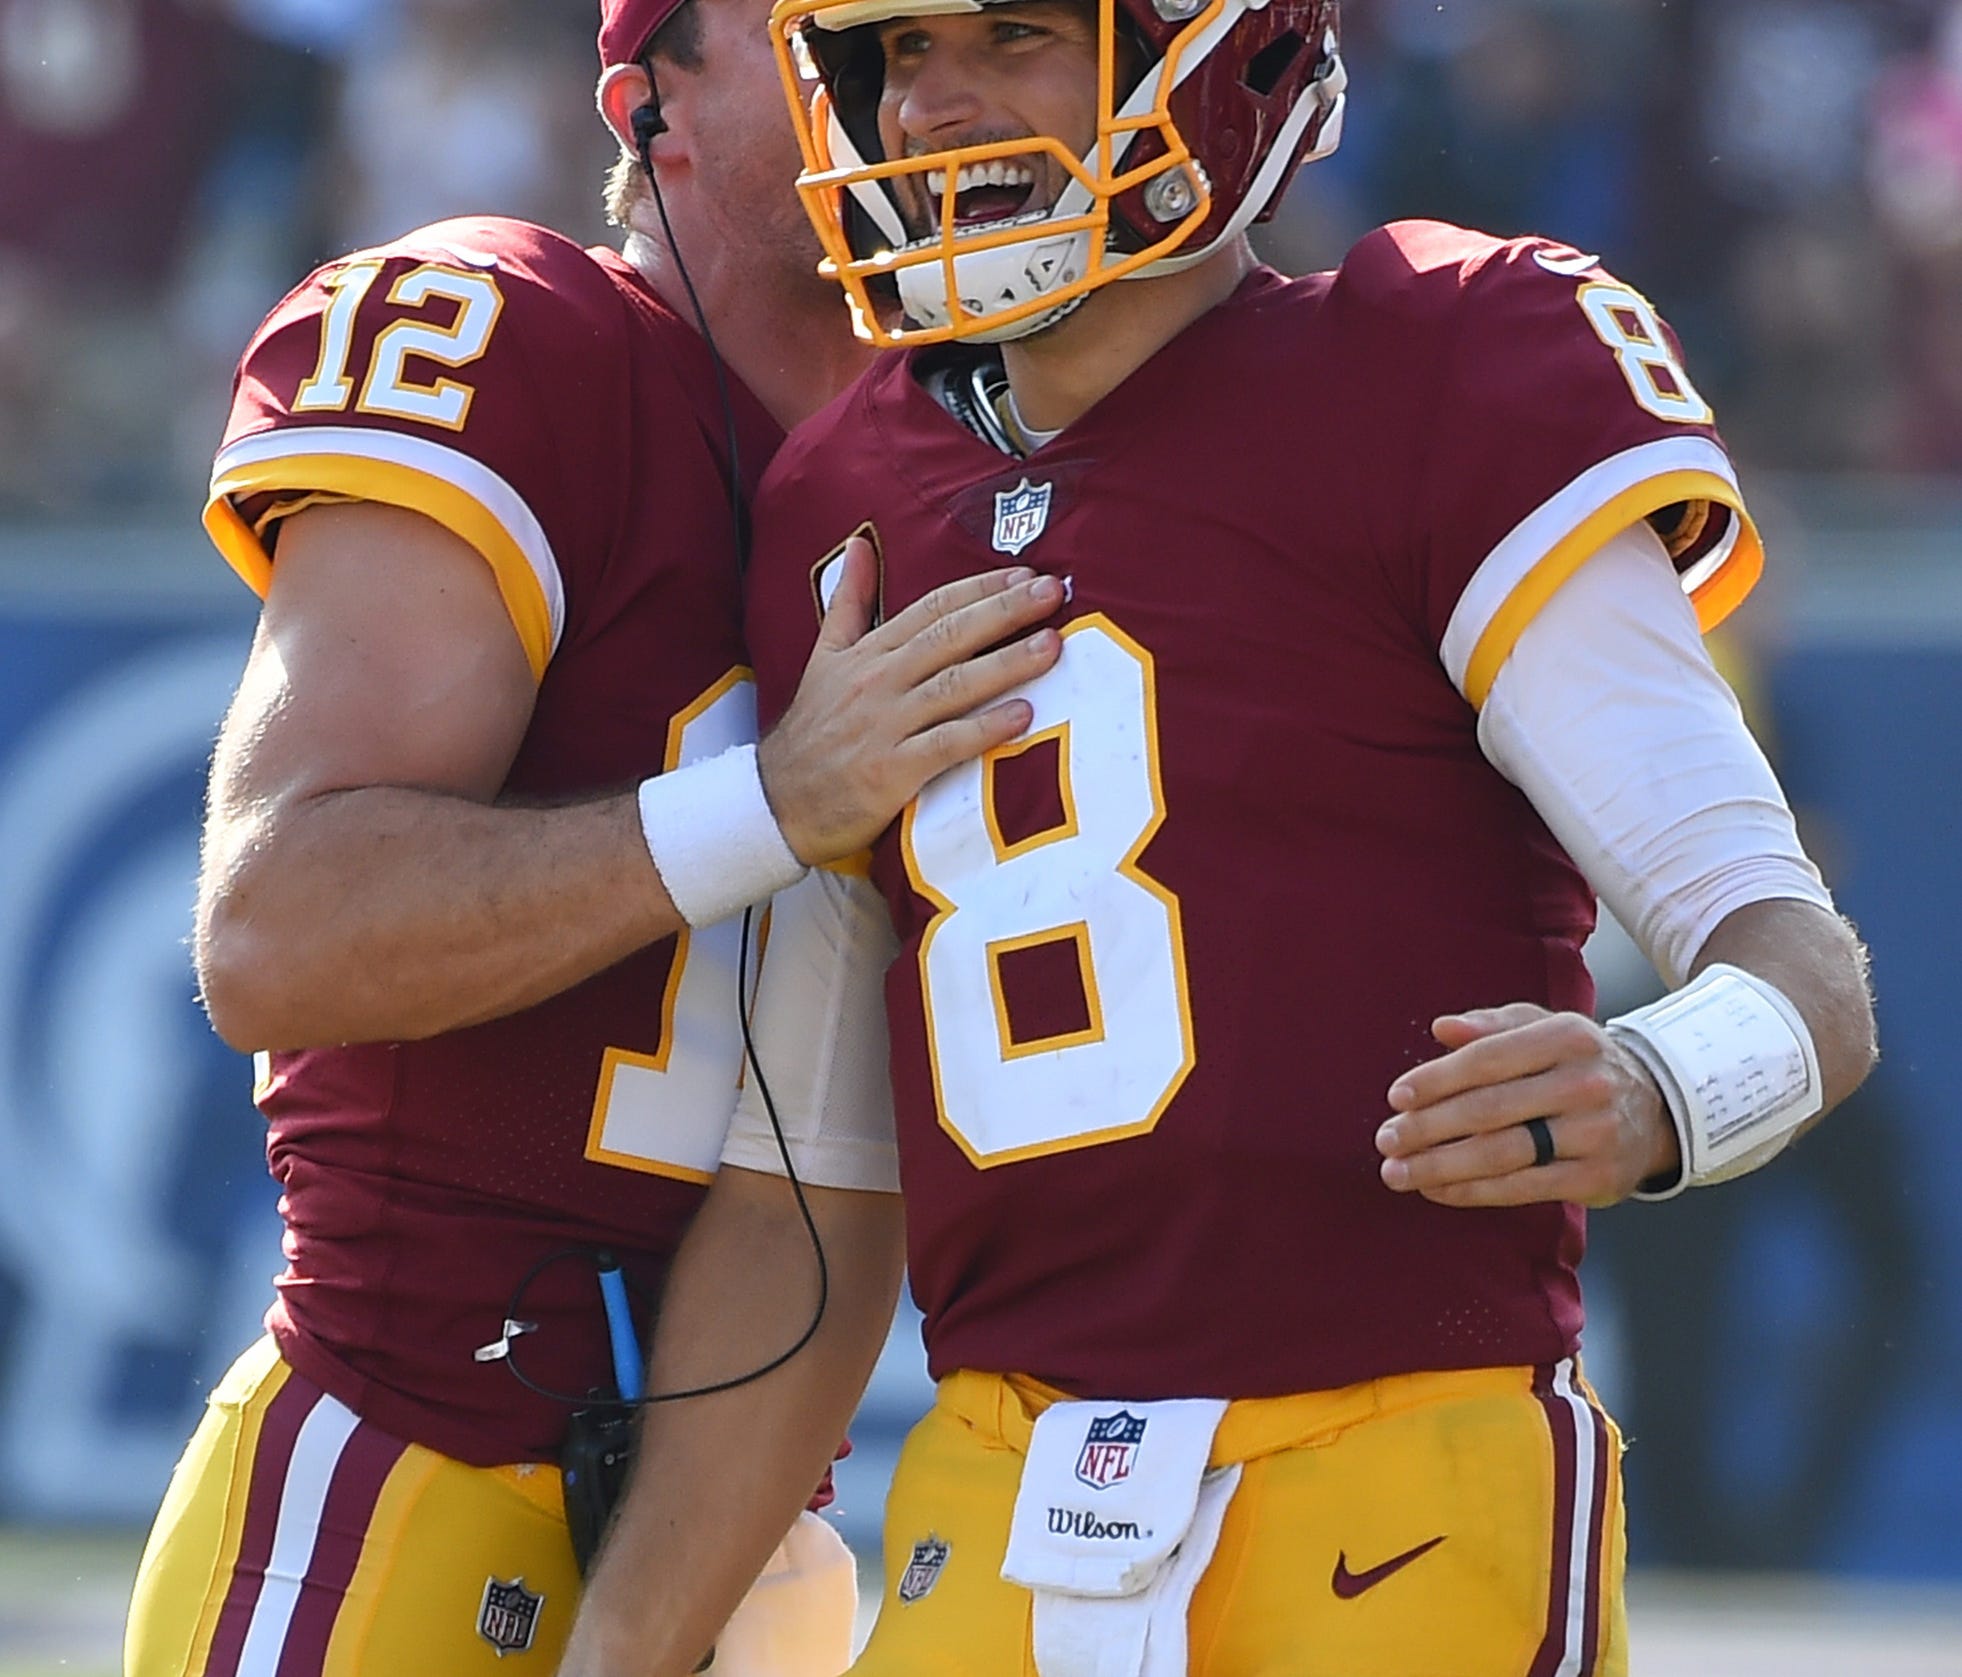 Washington Redskins quarterback Kirk Cousins (8) celebrates with Washington Redskins quarterback Colt McCoy (12) after throwing what turned out to be the game winning touchdown in the game against the Los Angeles Rams at the Los Angeles Memorial Coli